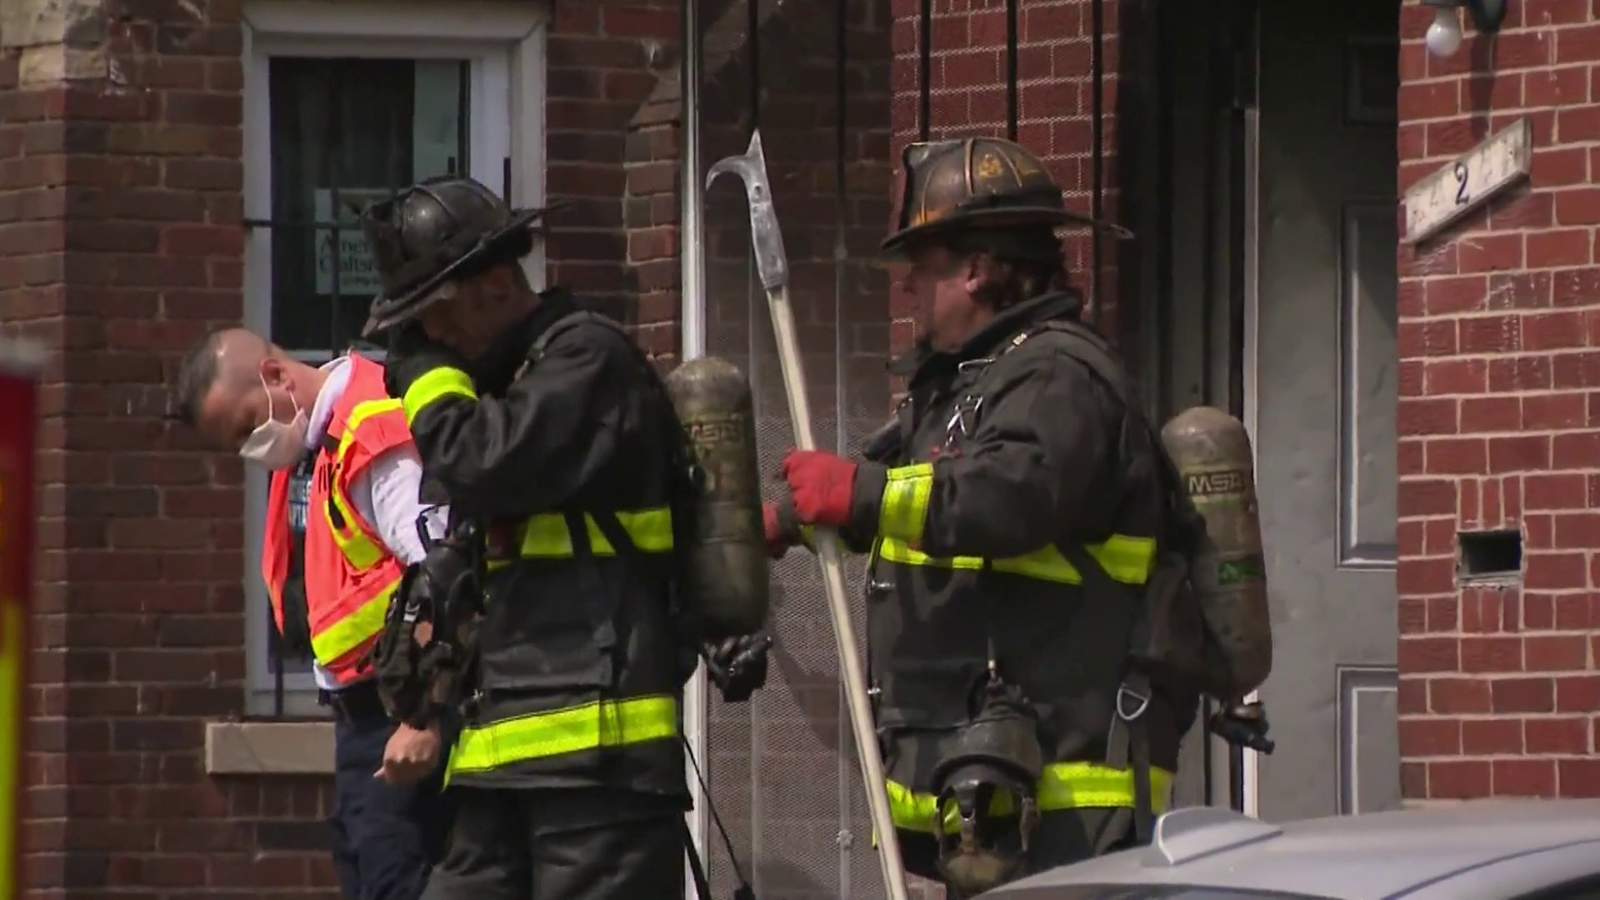 Child killed in Detroit house fire that started in bedroom, firefighters say